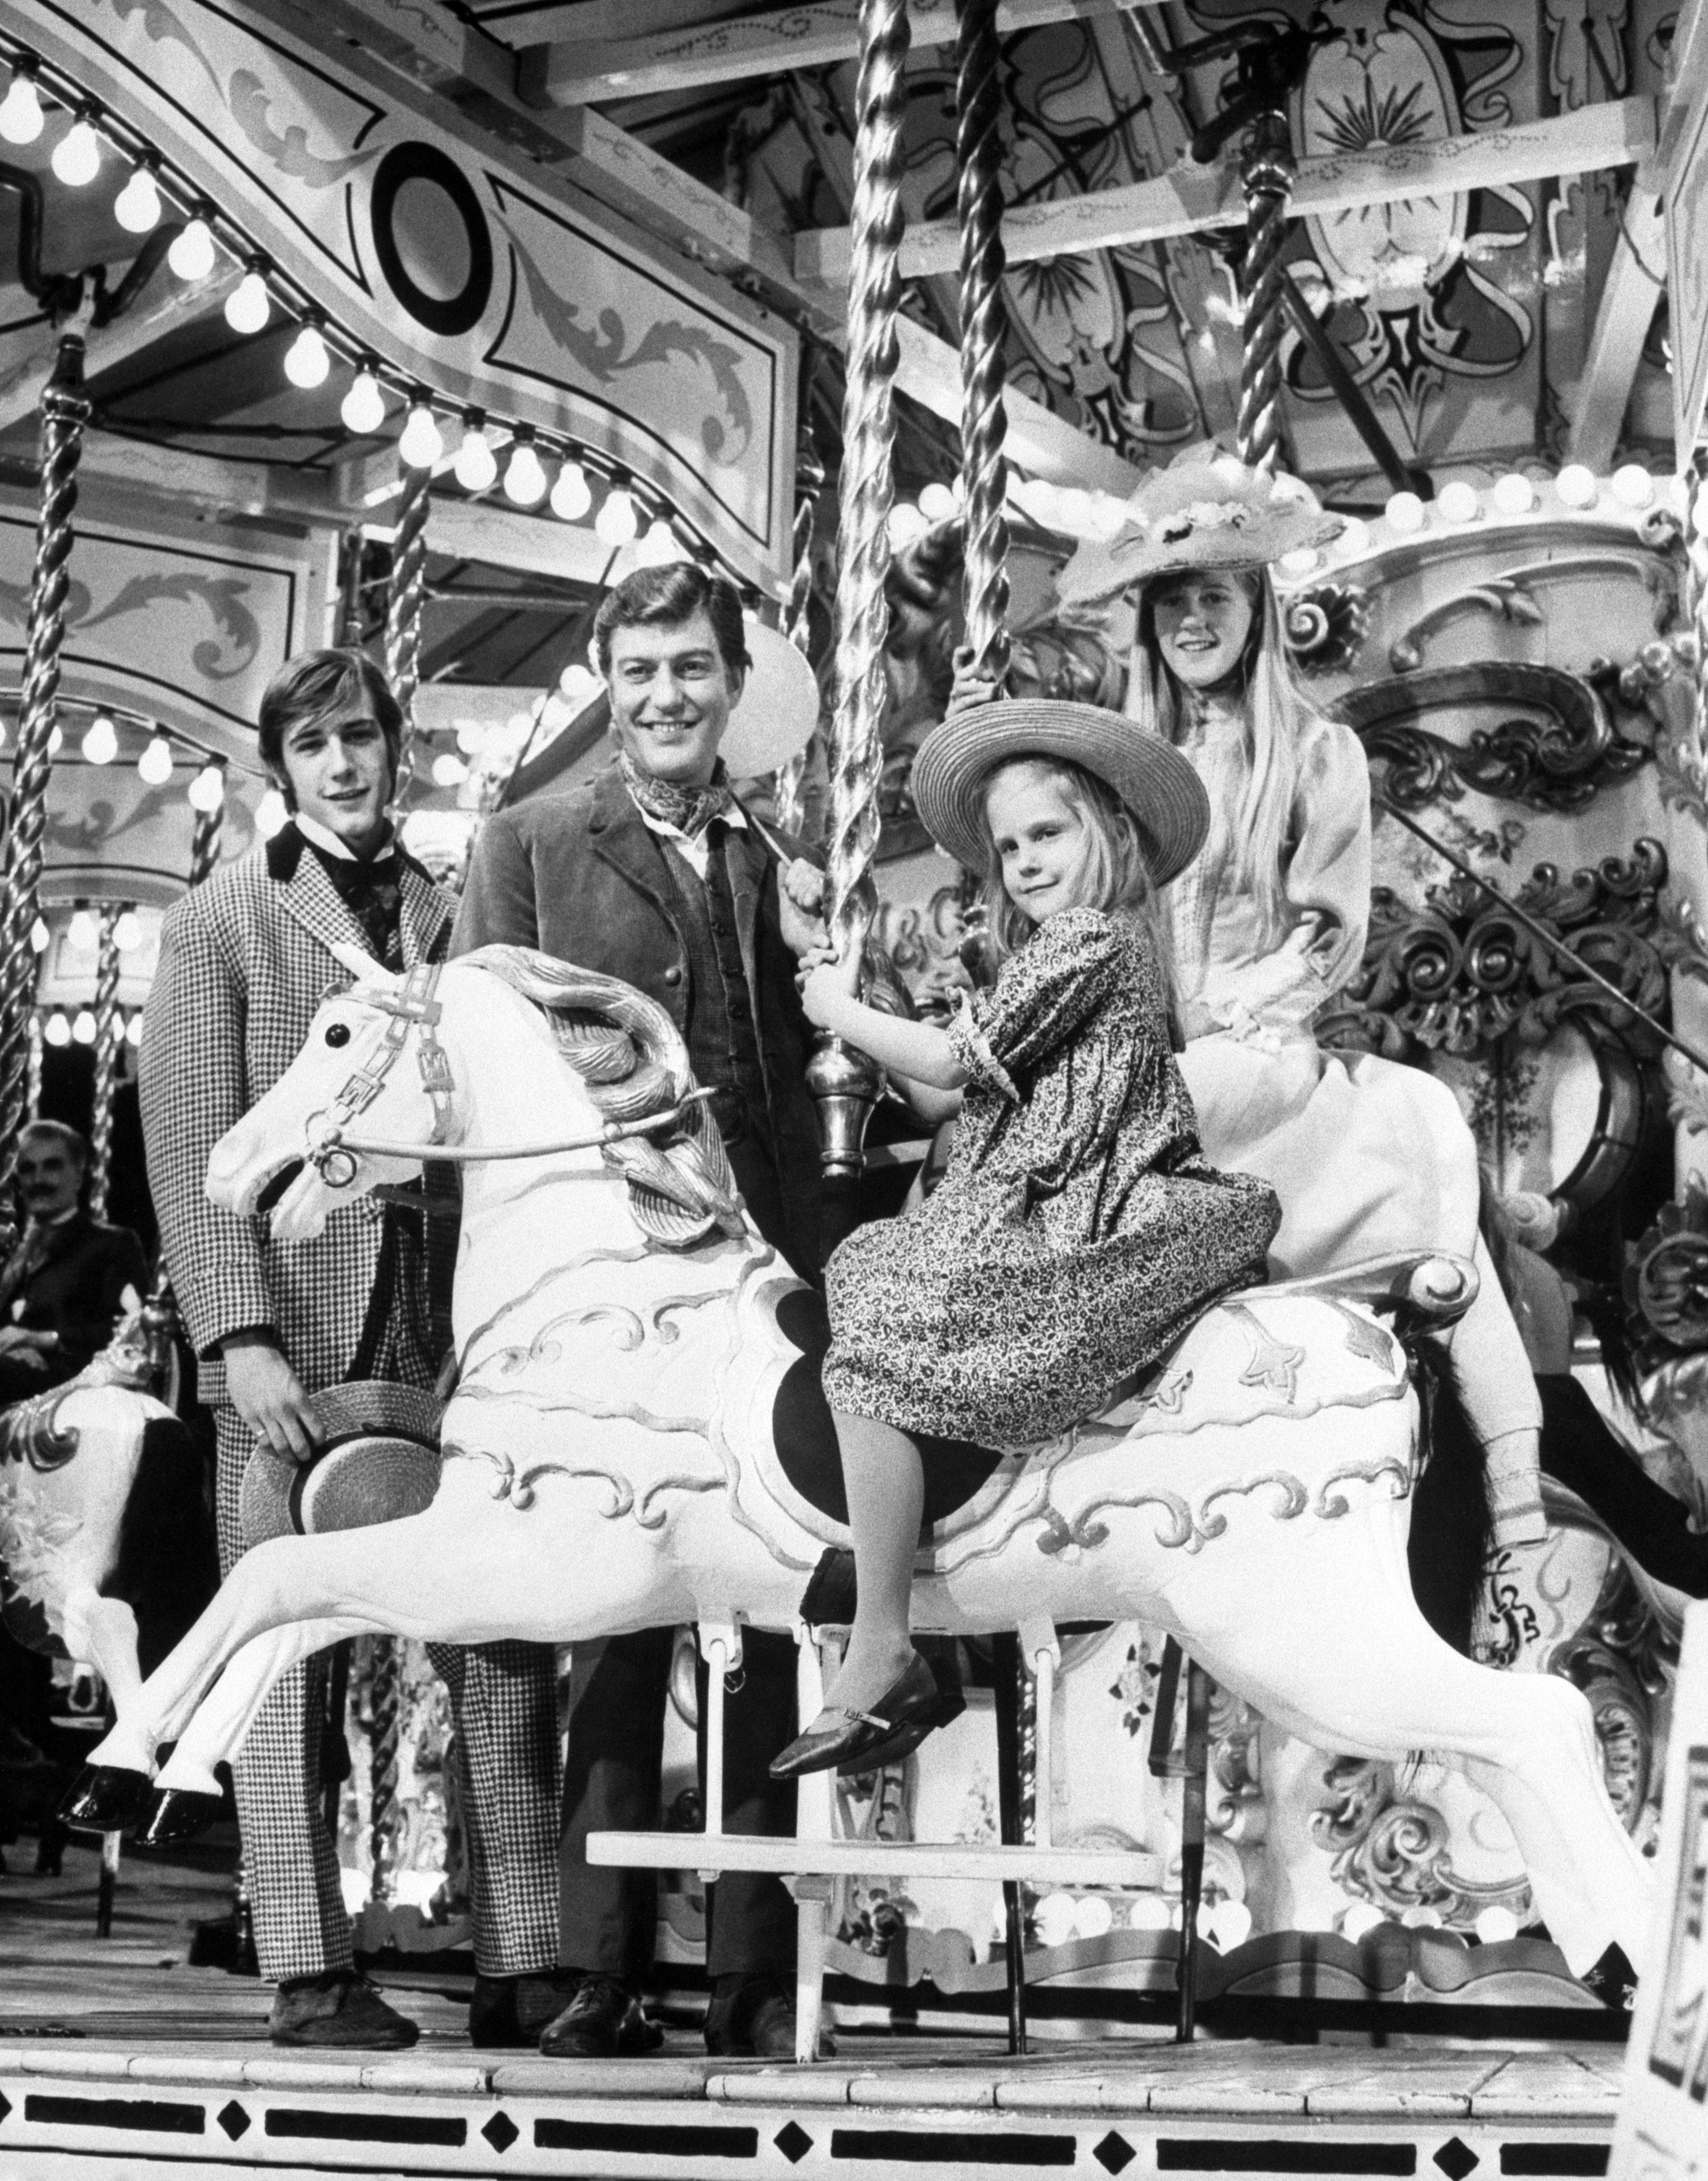 Six-year-old CARRIE BETH and her sister STACEY, 13, steal the scene here from their brother BARRY, 16, and father DICK VAN DYKE, who watch as the girls go round the merry-go-round at Pinewood Studios. in 1968. | Source: Getty Images